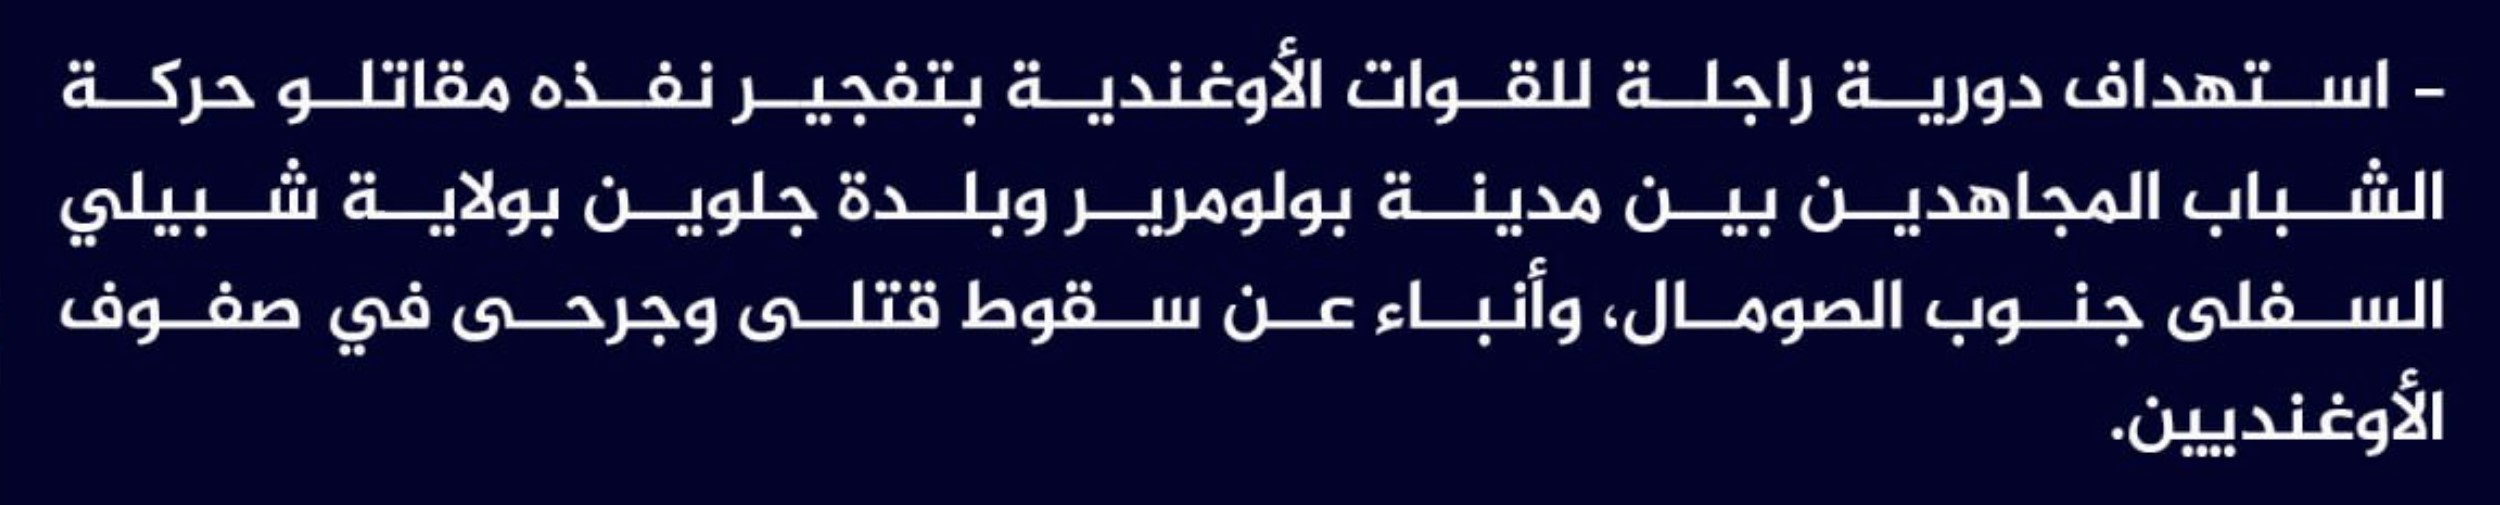 (Claim) al-Shabaab Targeted an Ugandan Foot Patrol by IED Killing and Injuring Several in Bulo Marer City and Golweyn Town, Lower Shabelle, Southern Somalia - 9 July 2023